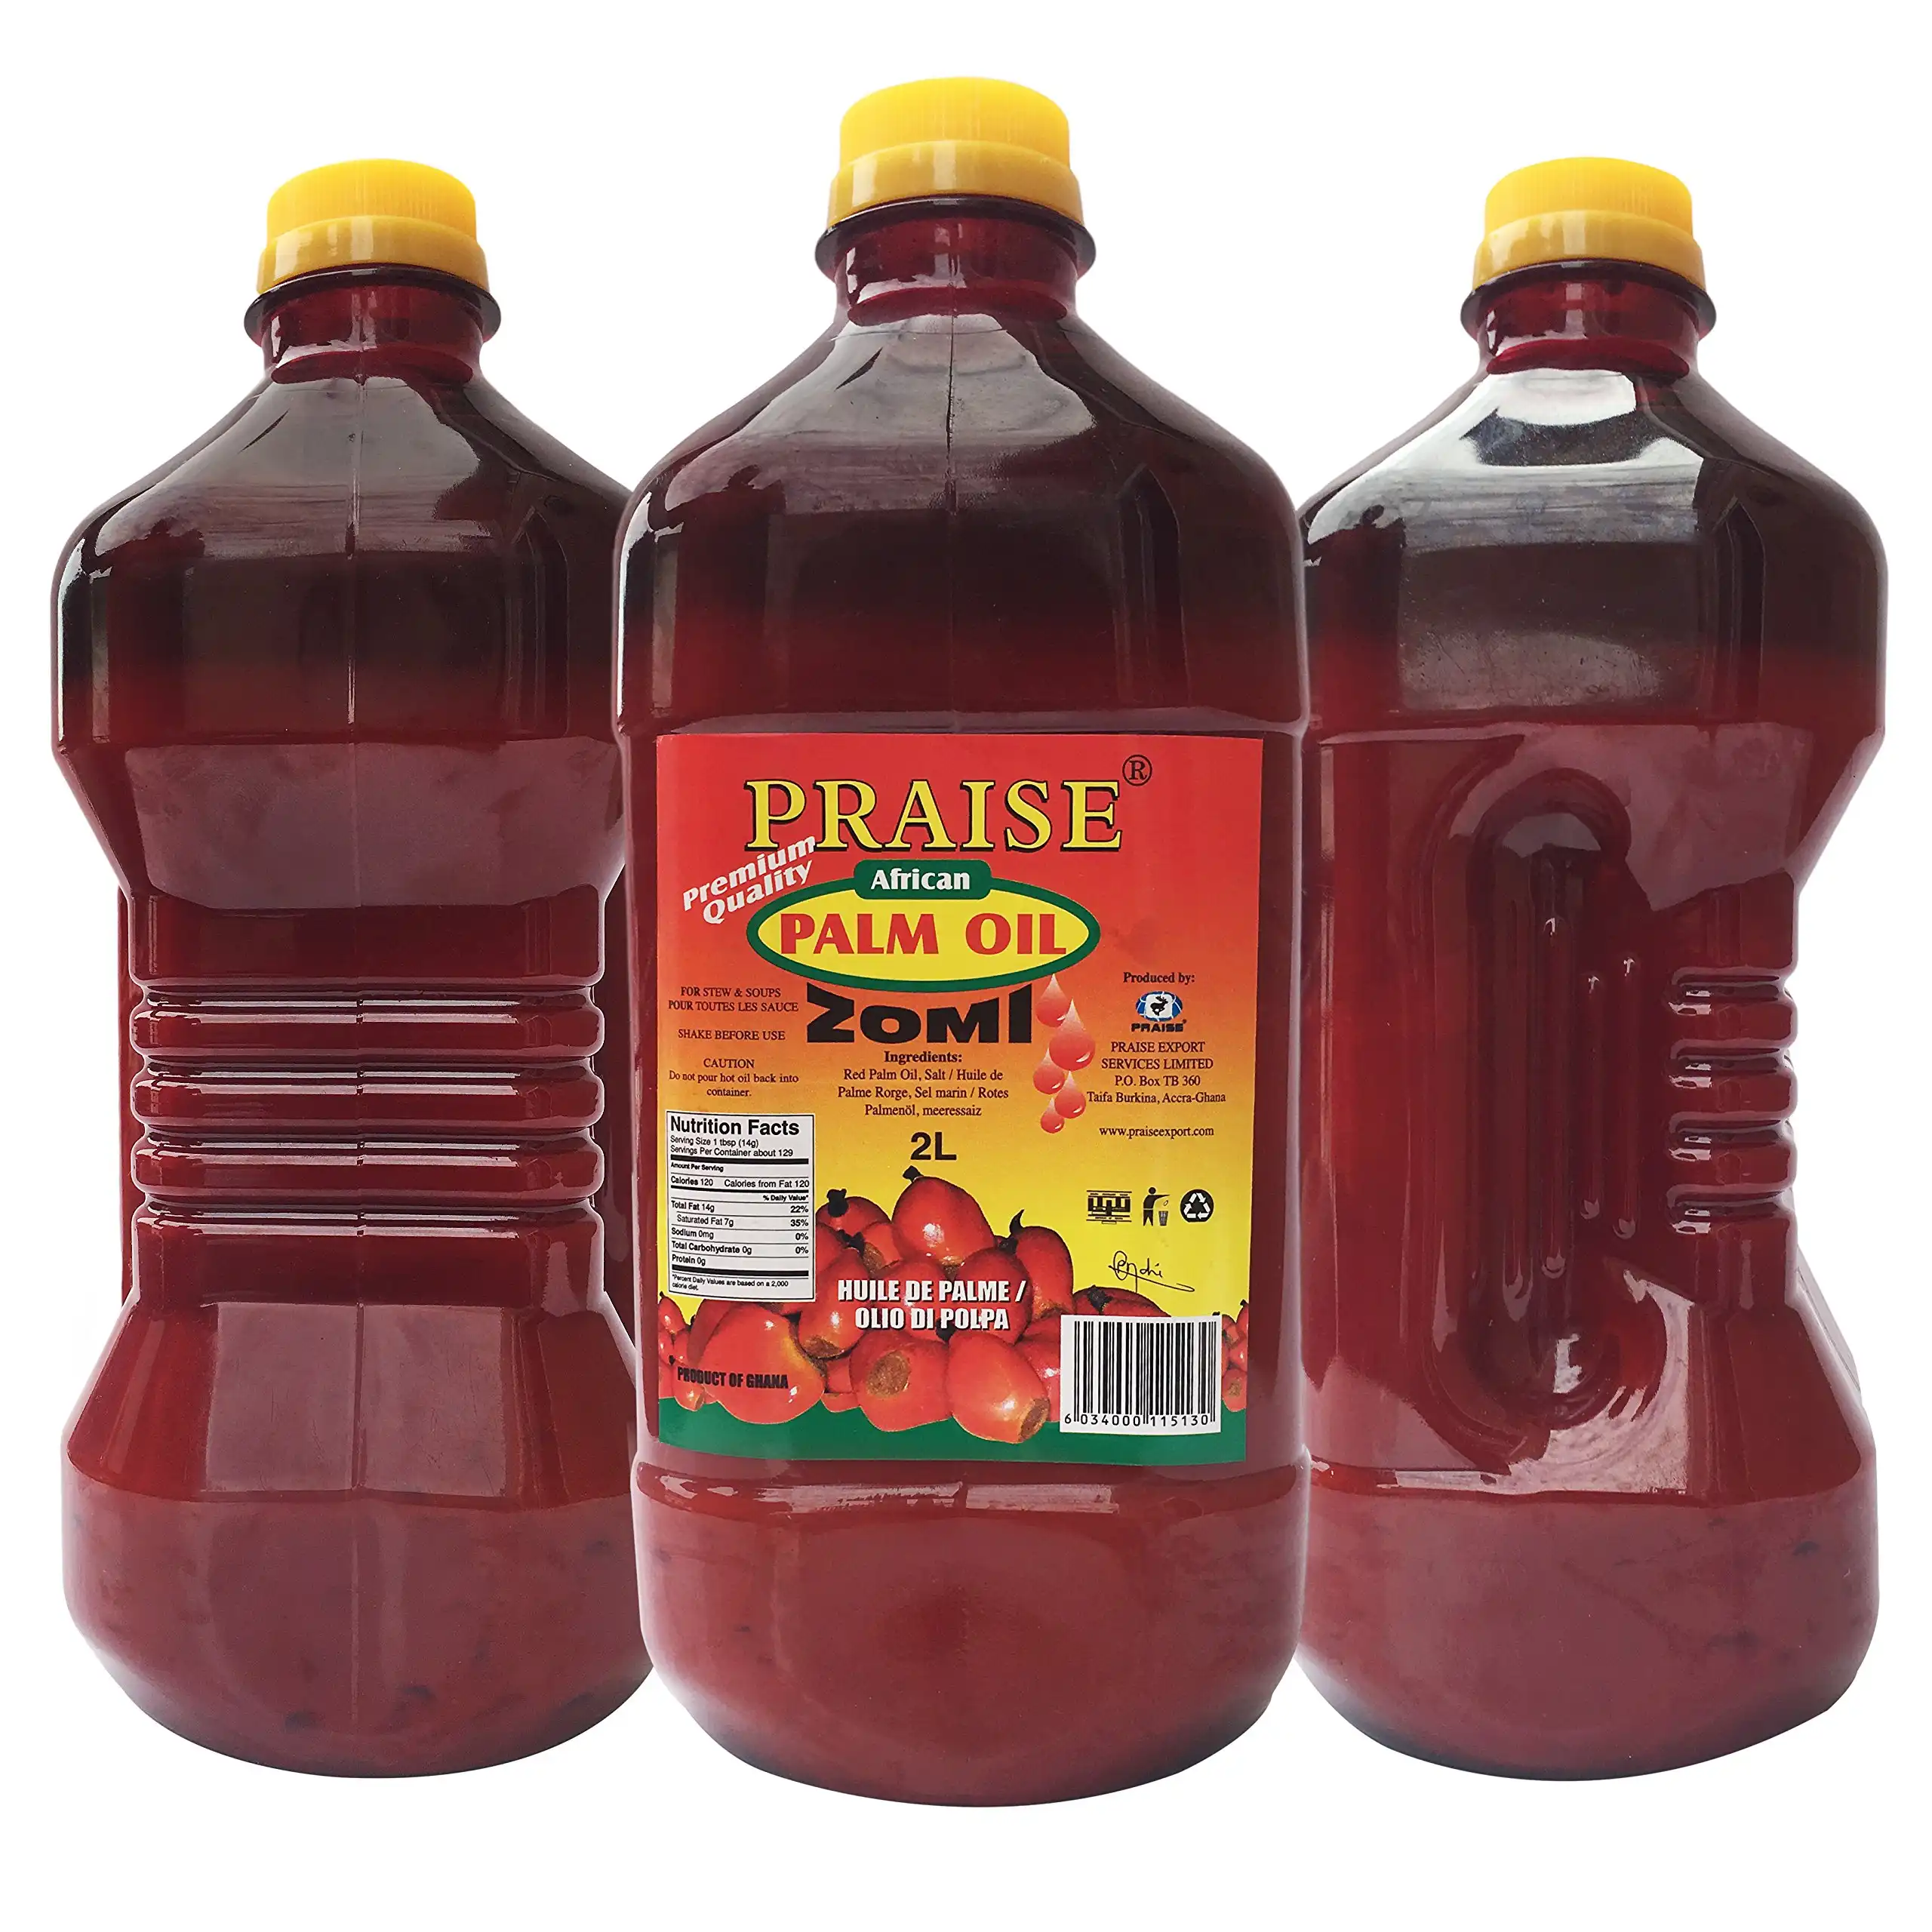 RBD Palm Oil - Refined Bleached Deodorized Palm Olein - Vegetable Cooking Oil from Ukraine